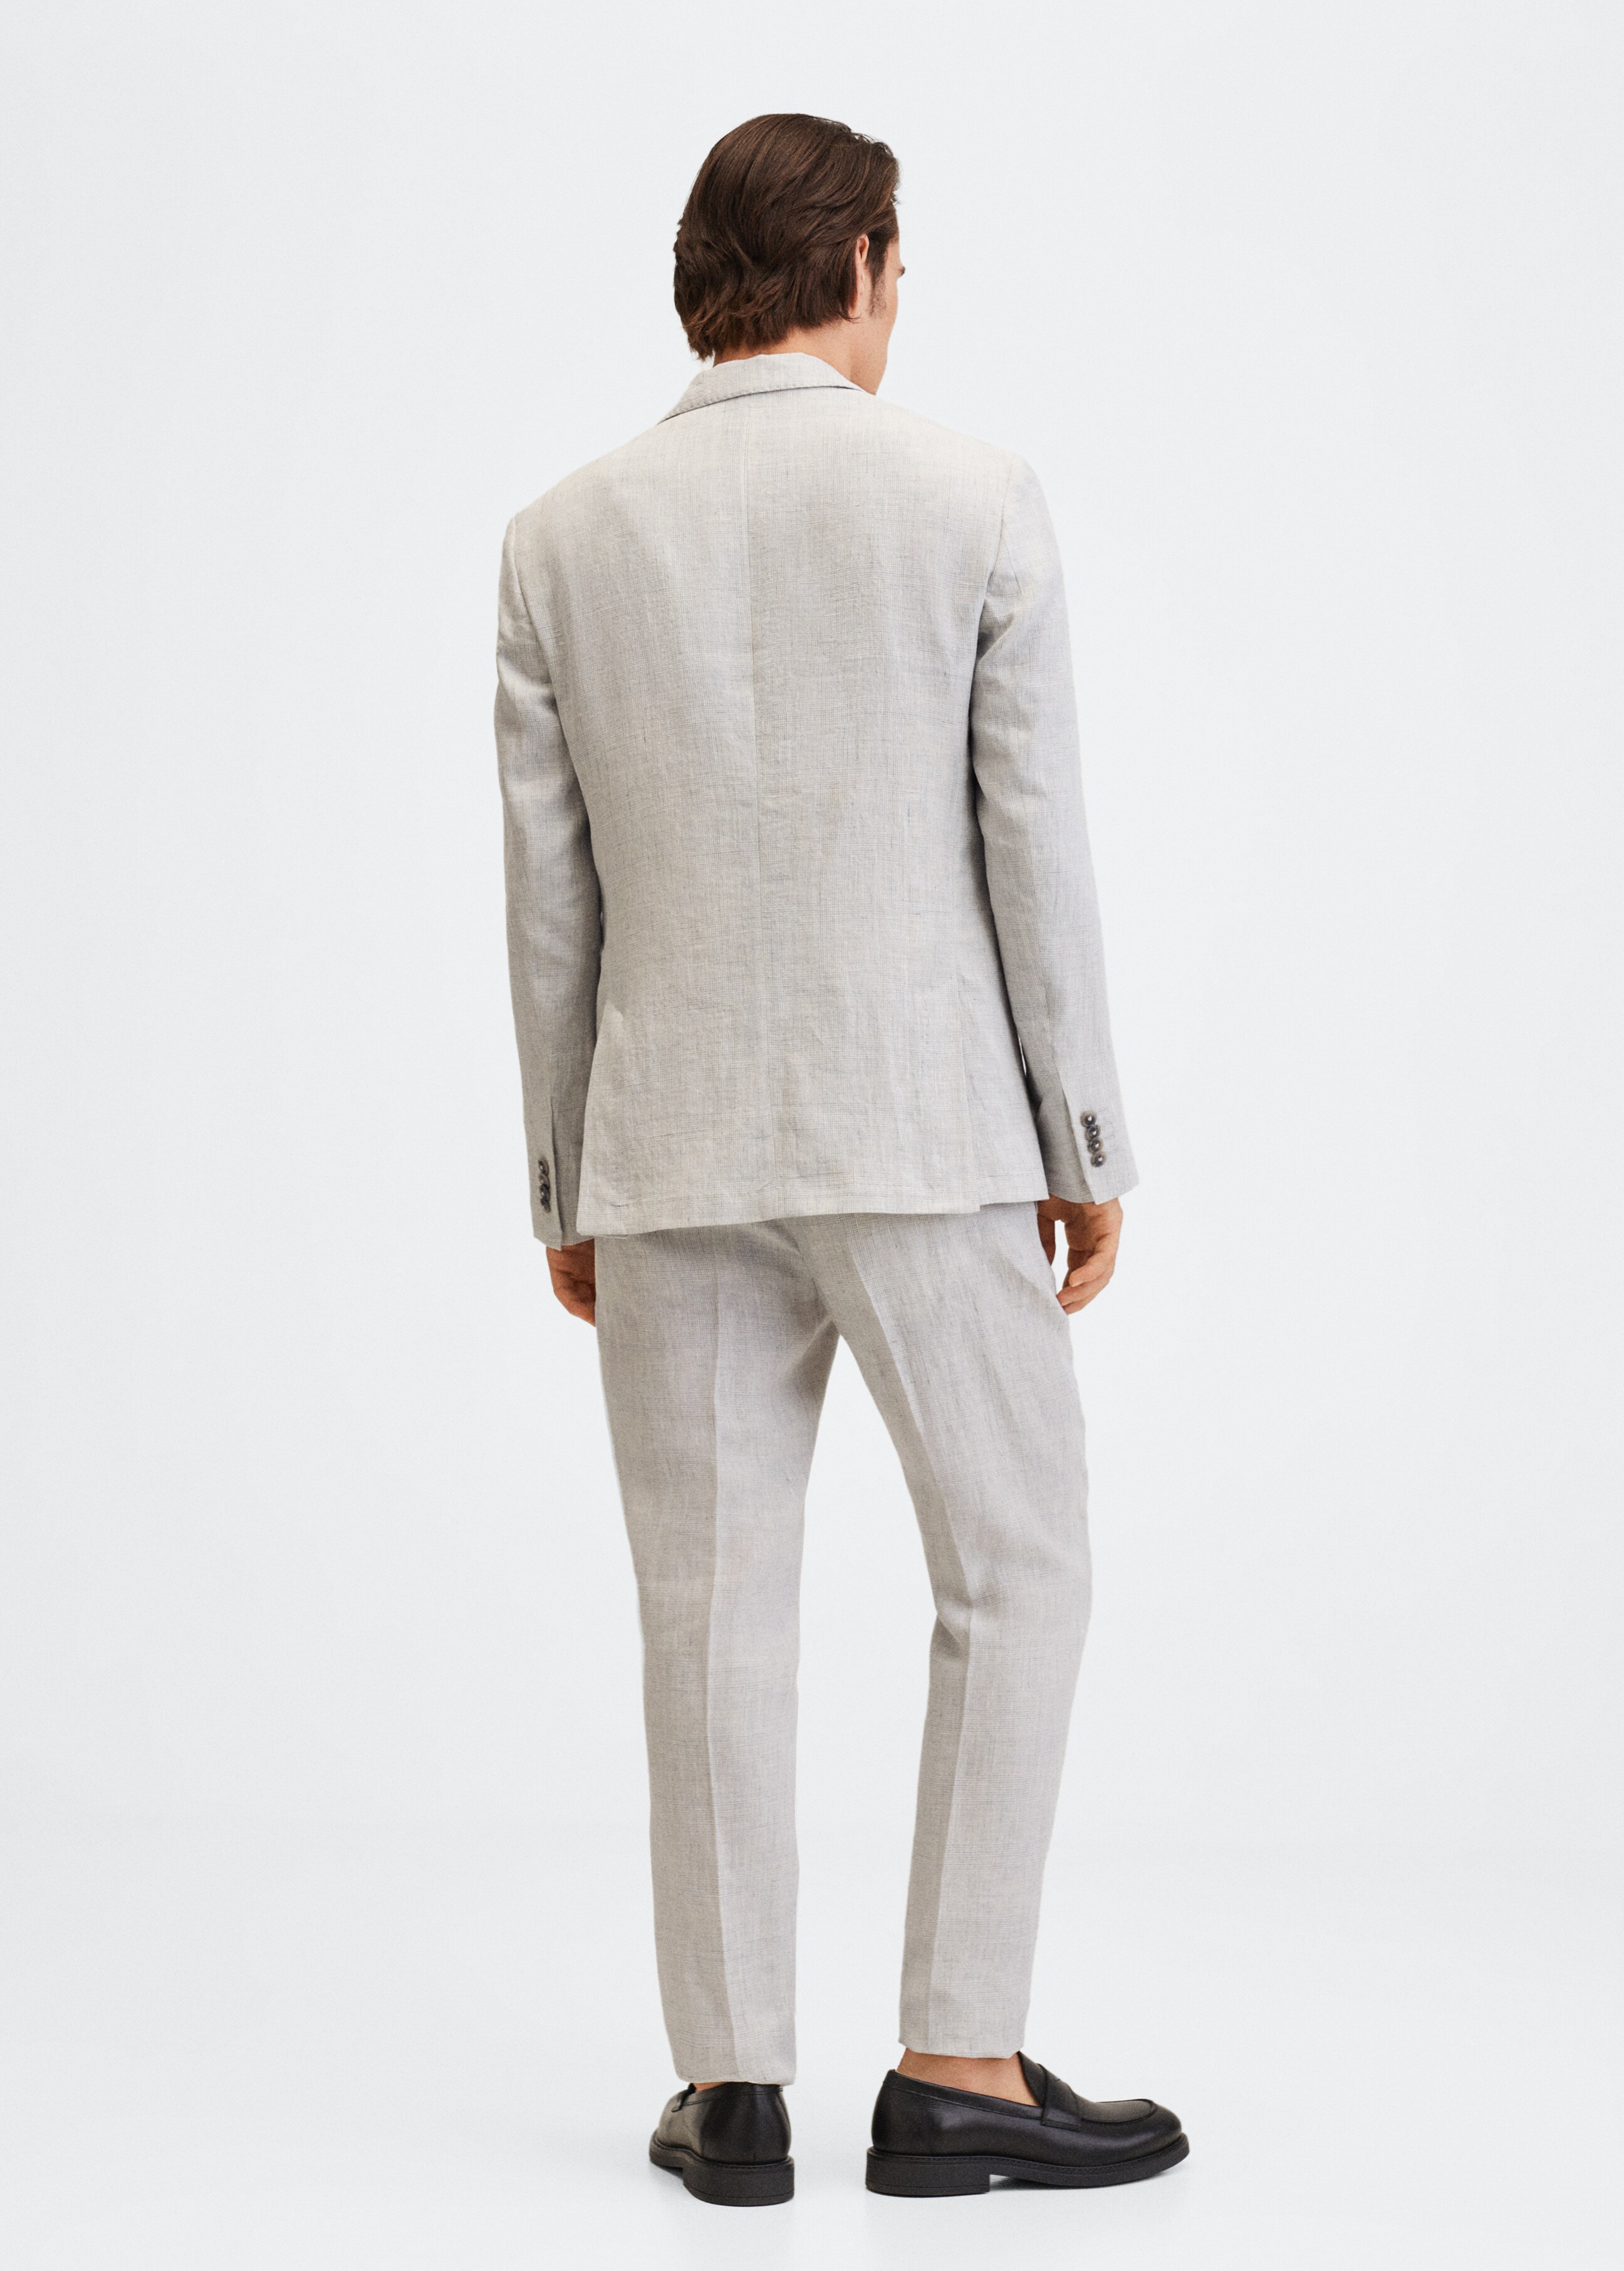  Linen suit trousers - Reverse of the article